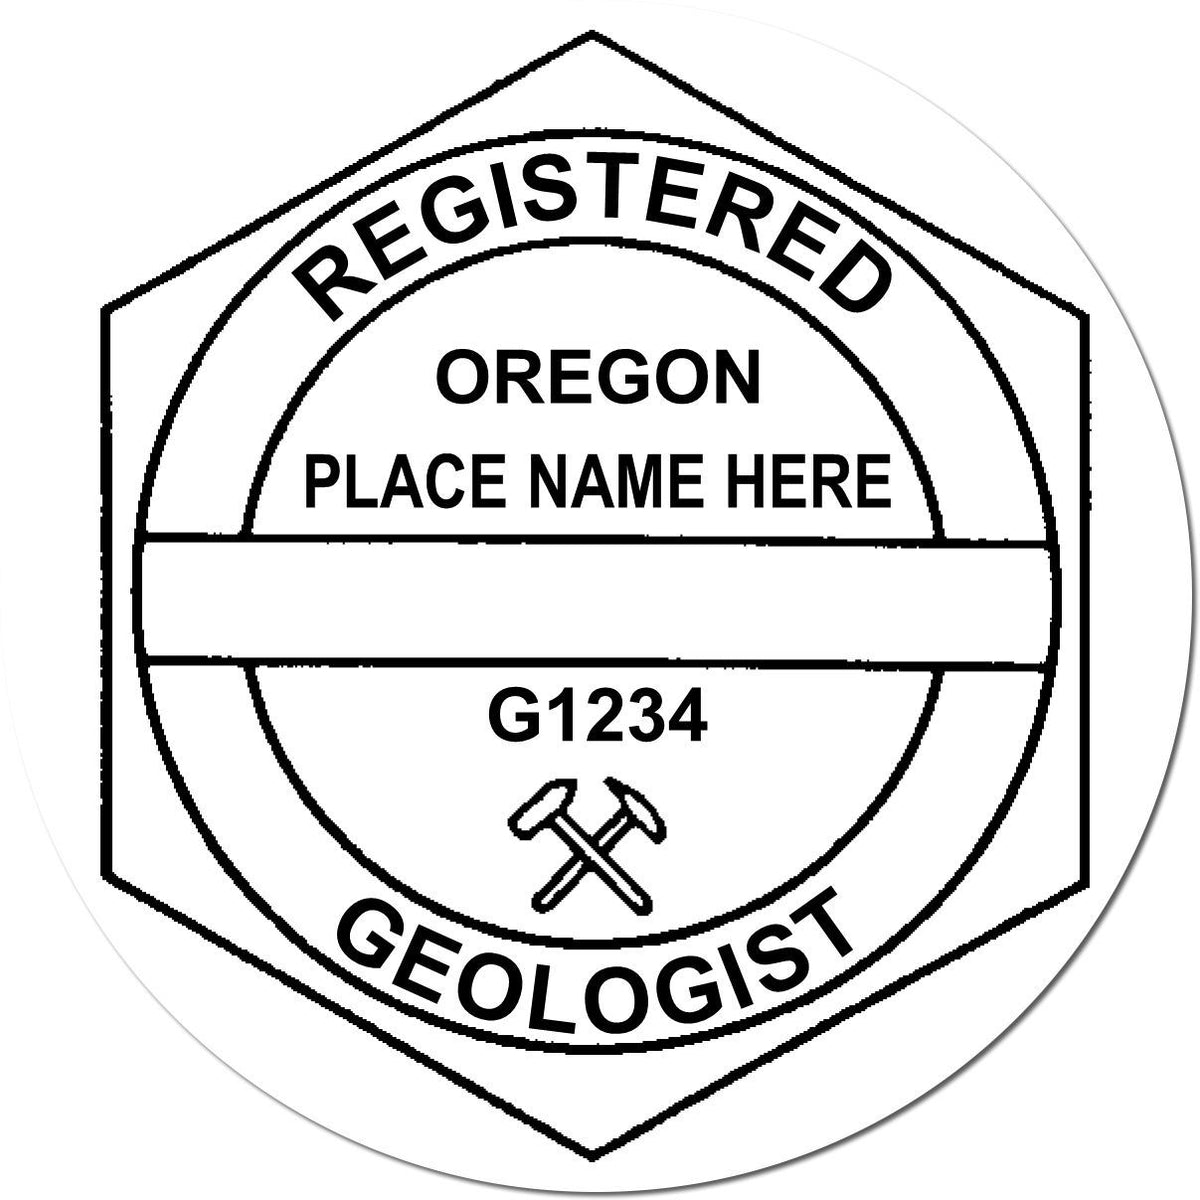 This paper is stamped with a sample imprint of the Oregon Professional Geologist Seal Stamp, signifying its quality and reliability.